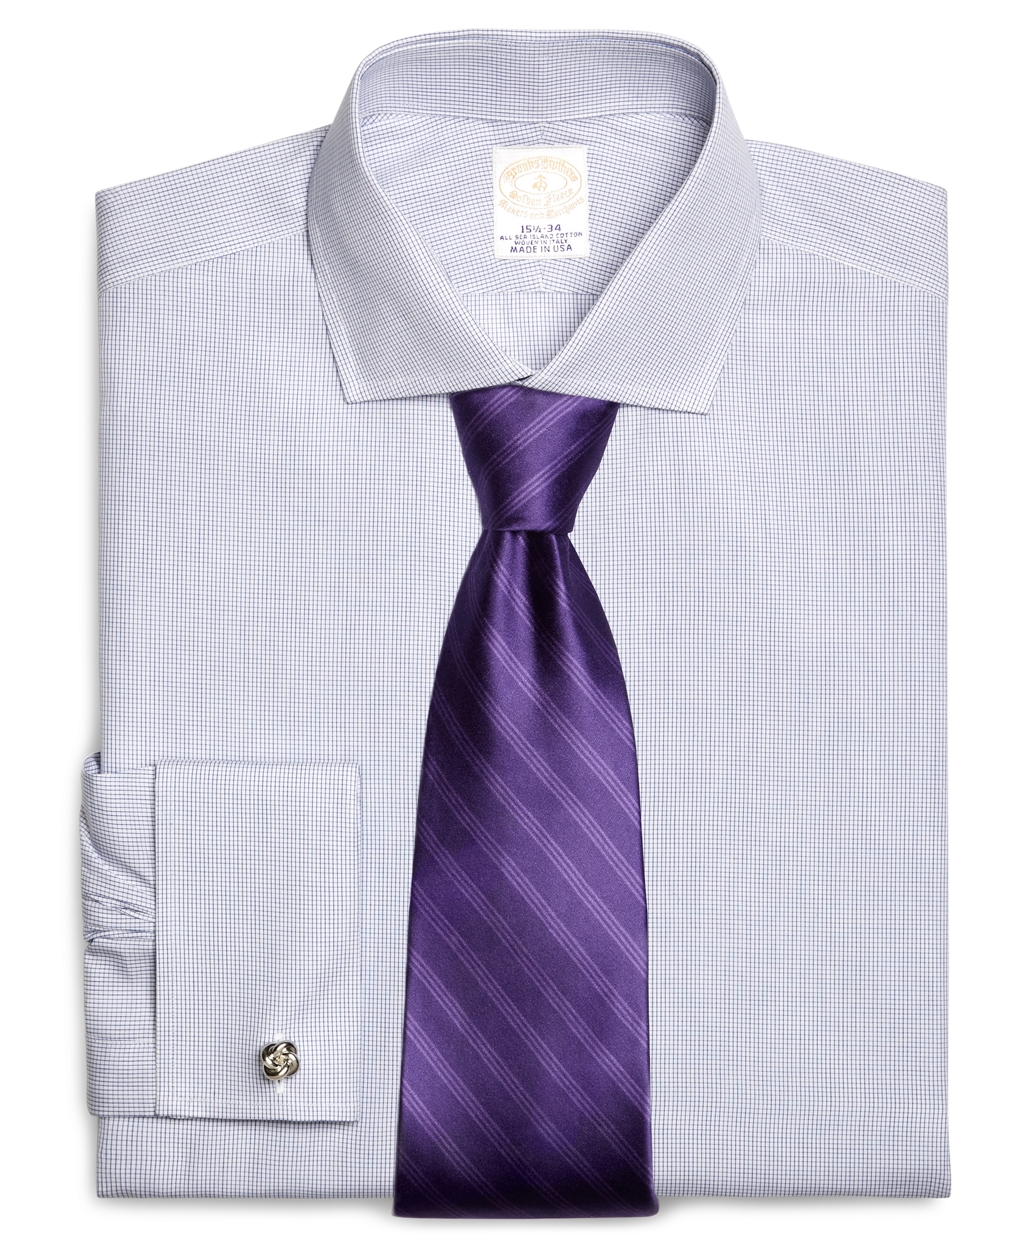 Lyst - Brooks Brothers Golden Fleece® Madison Fit French Cuff Small ...